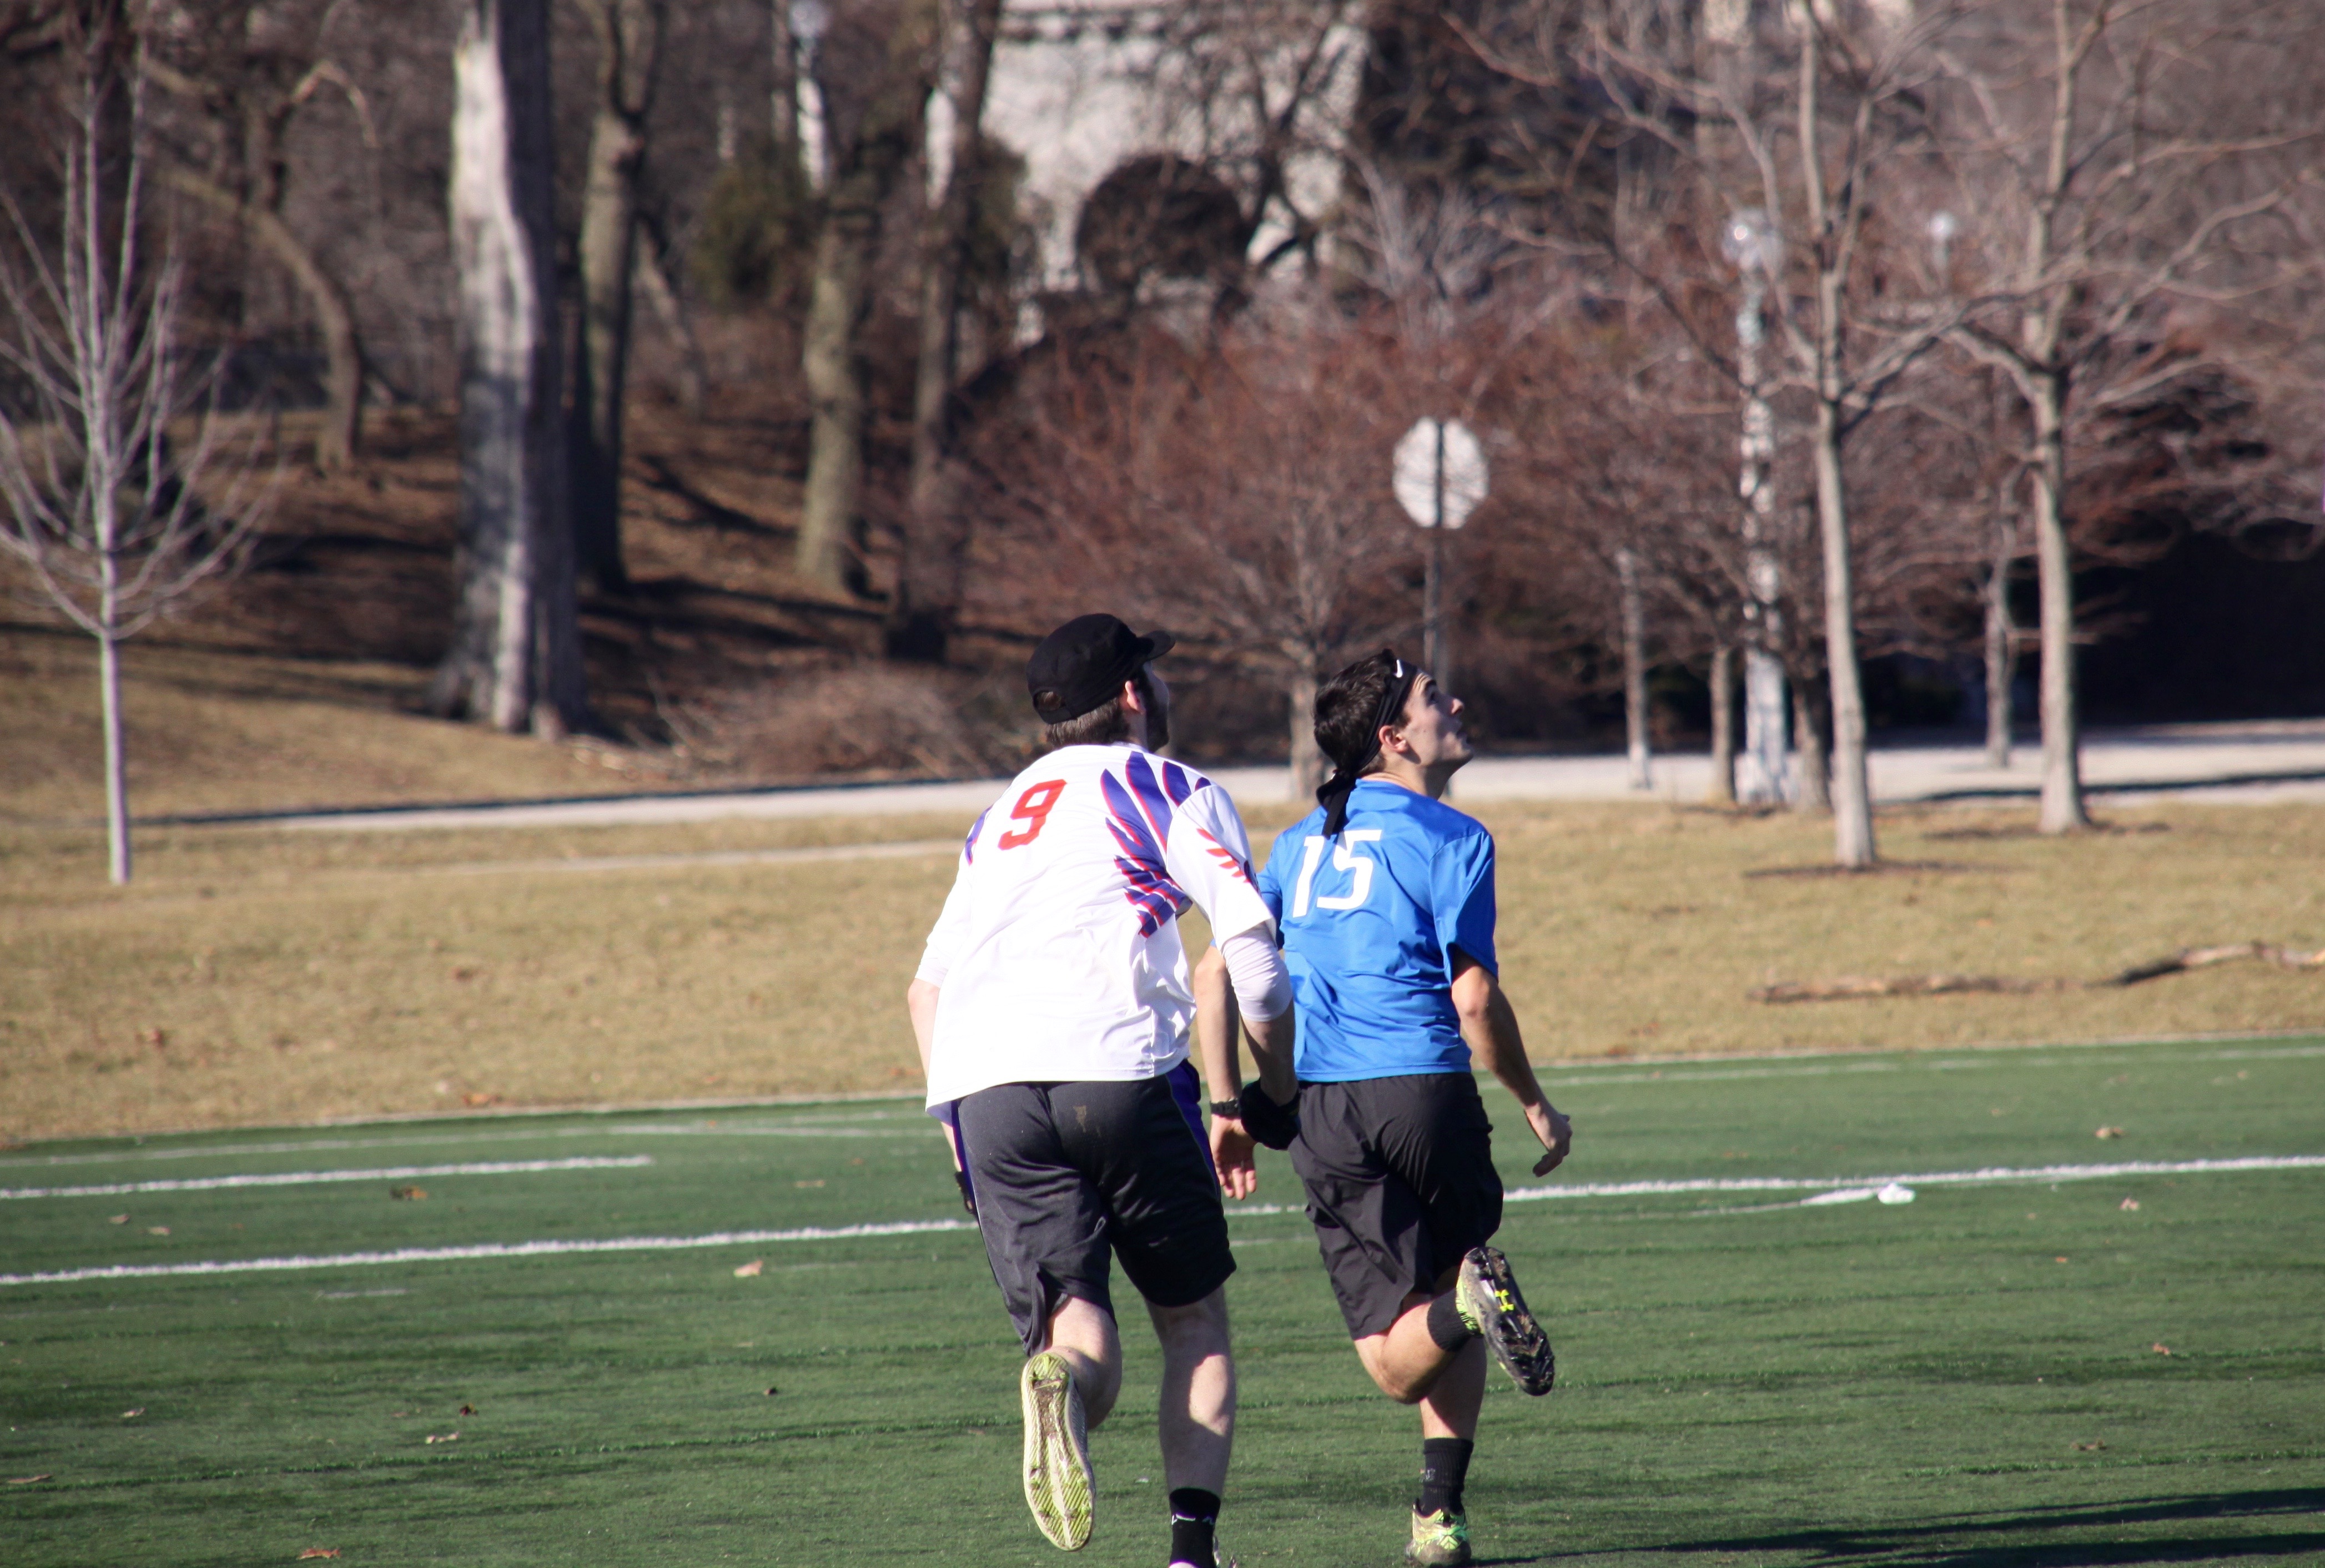 Josh Ludke chases Eric Swan as both players try to win the disc during a DePaul Ultimate Club practice on Jan. 21, 2017. (Photo/Ben Rains)